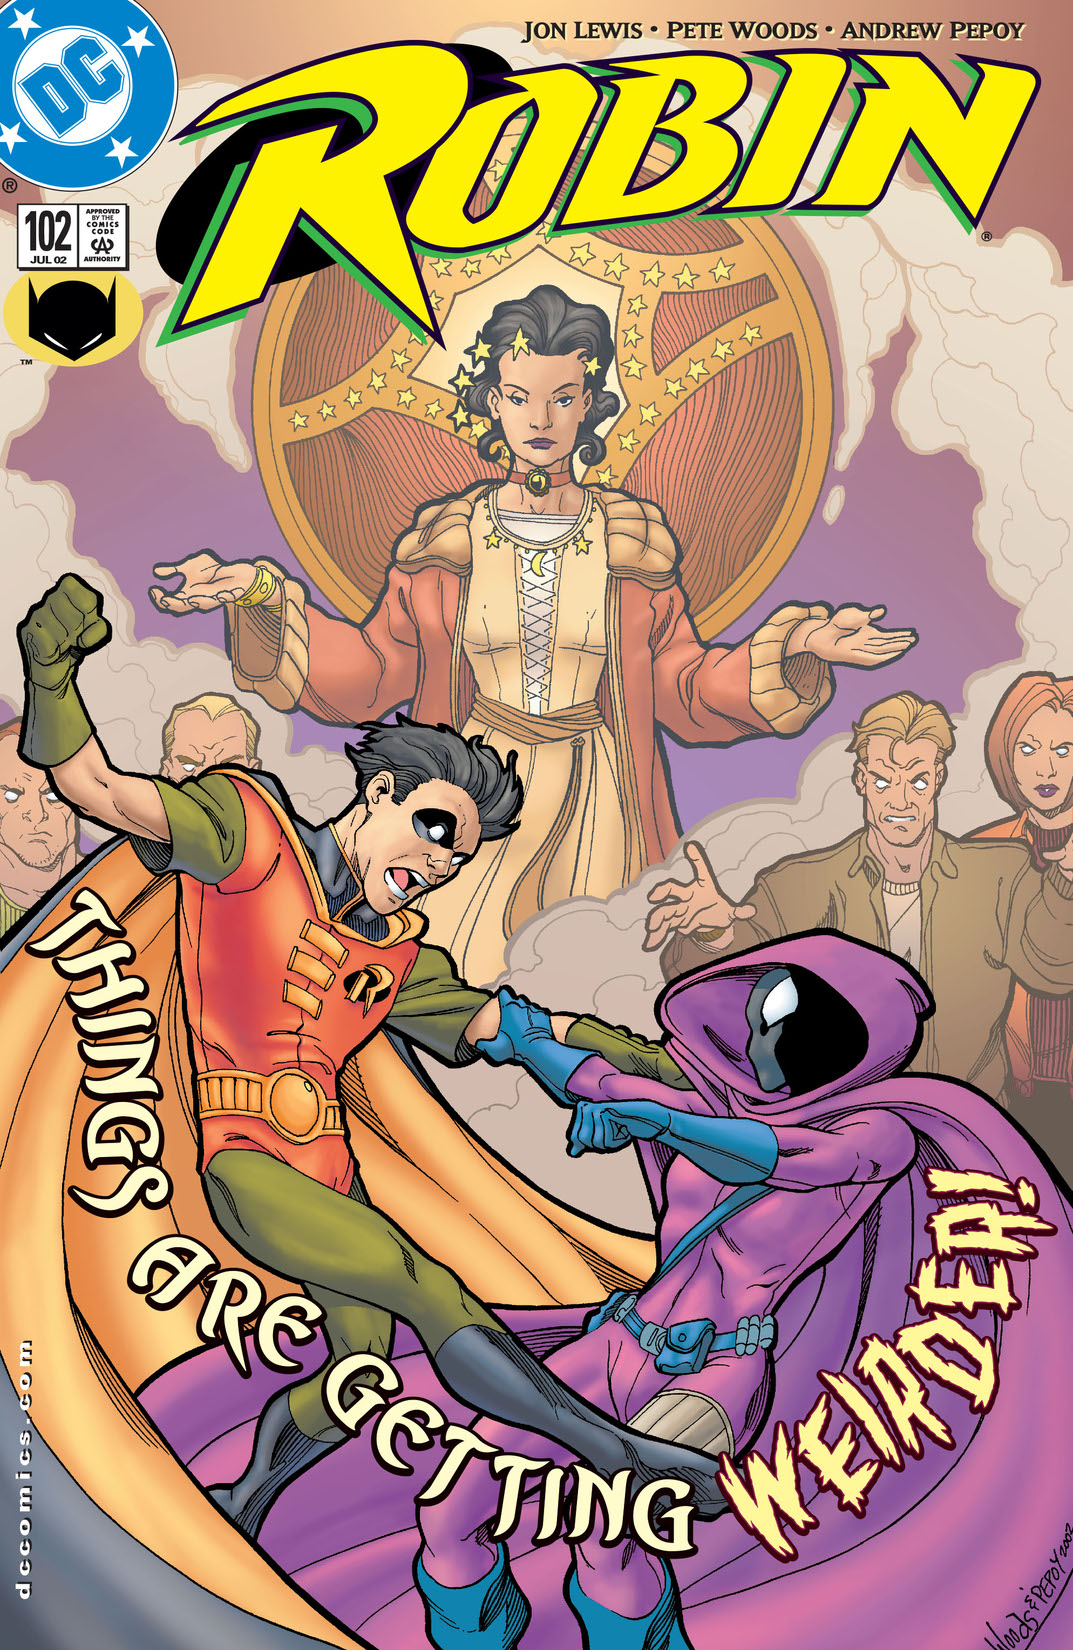 Robin (1993-) #102 preview images